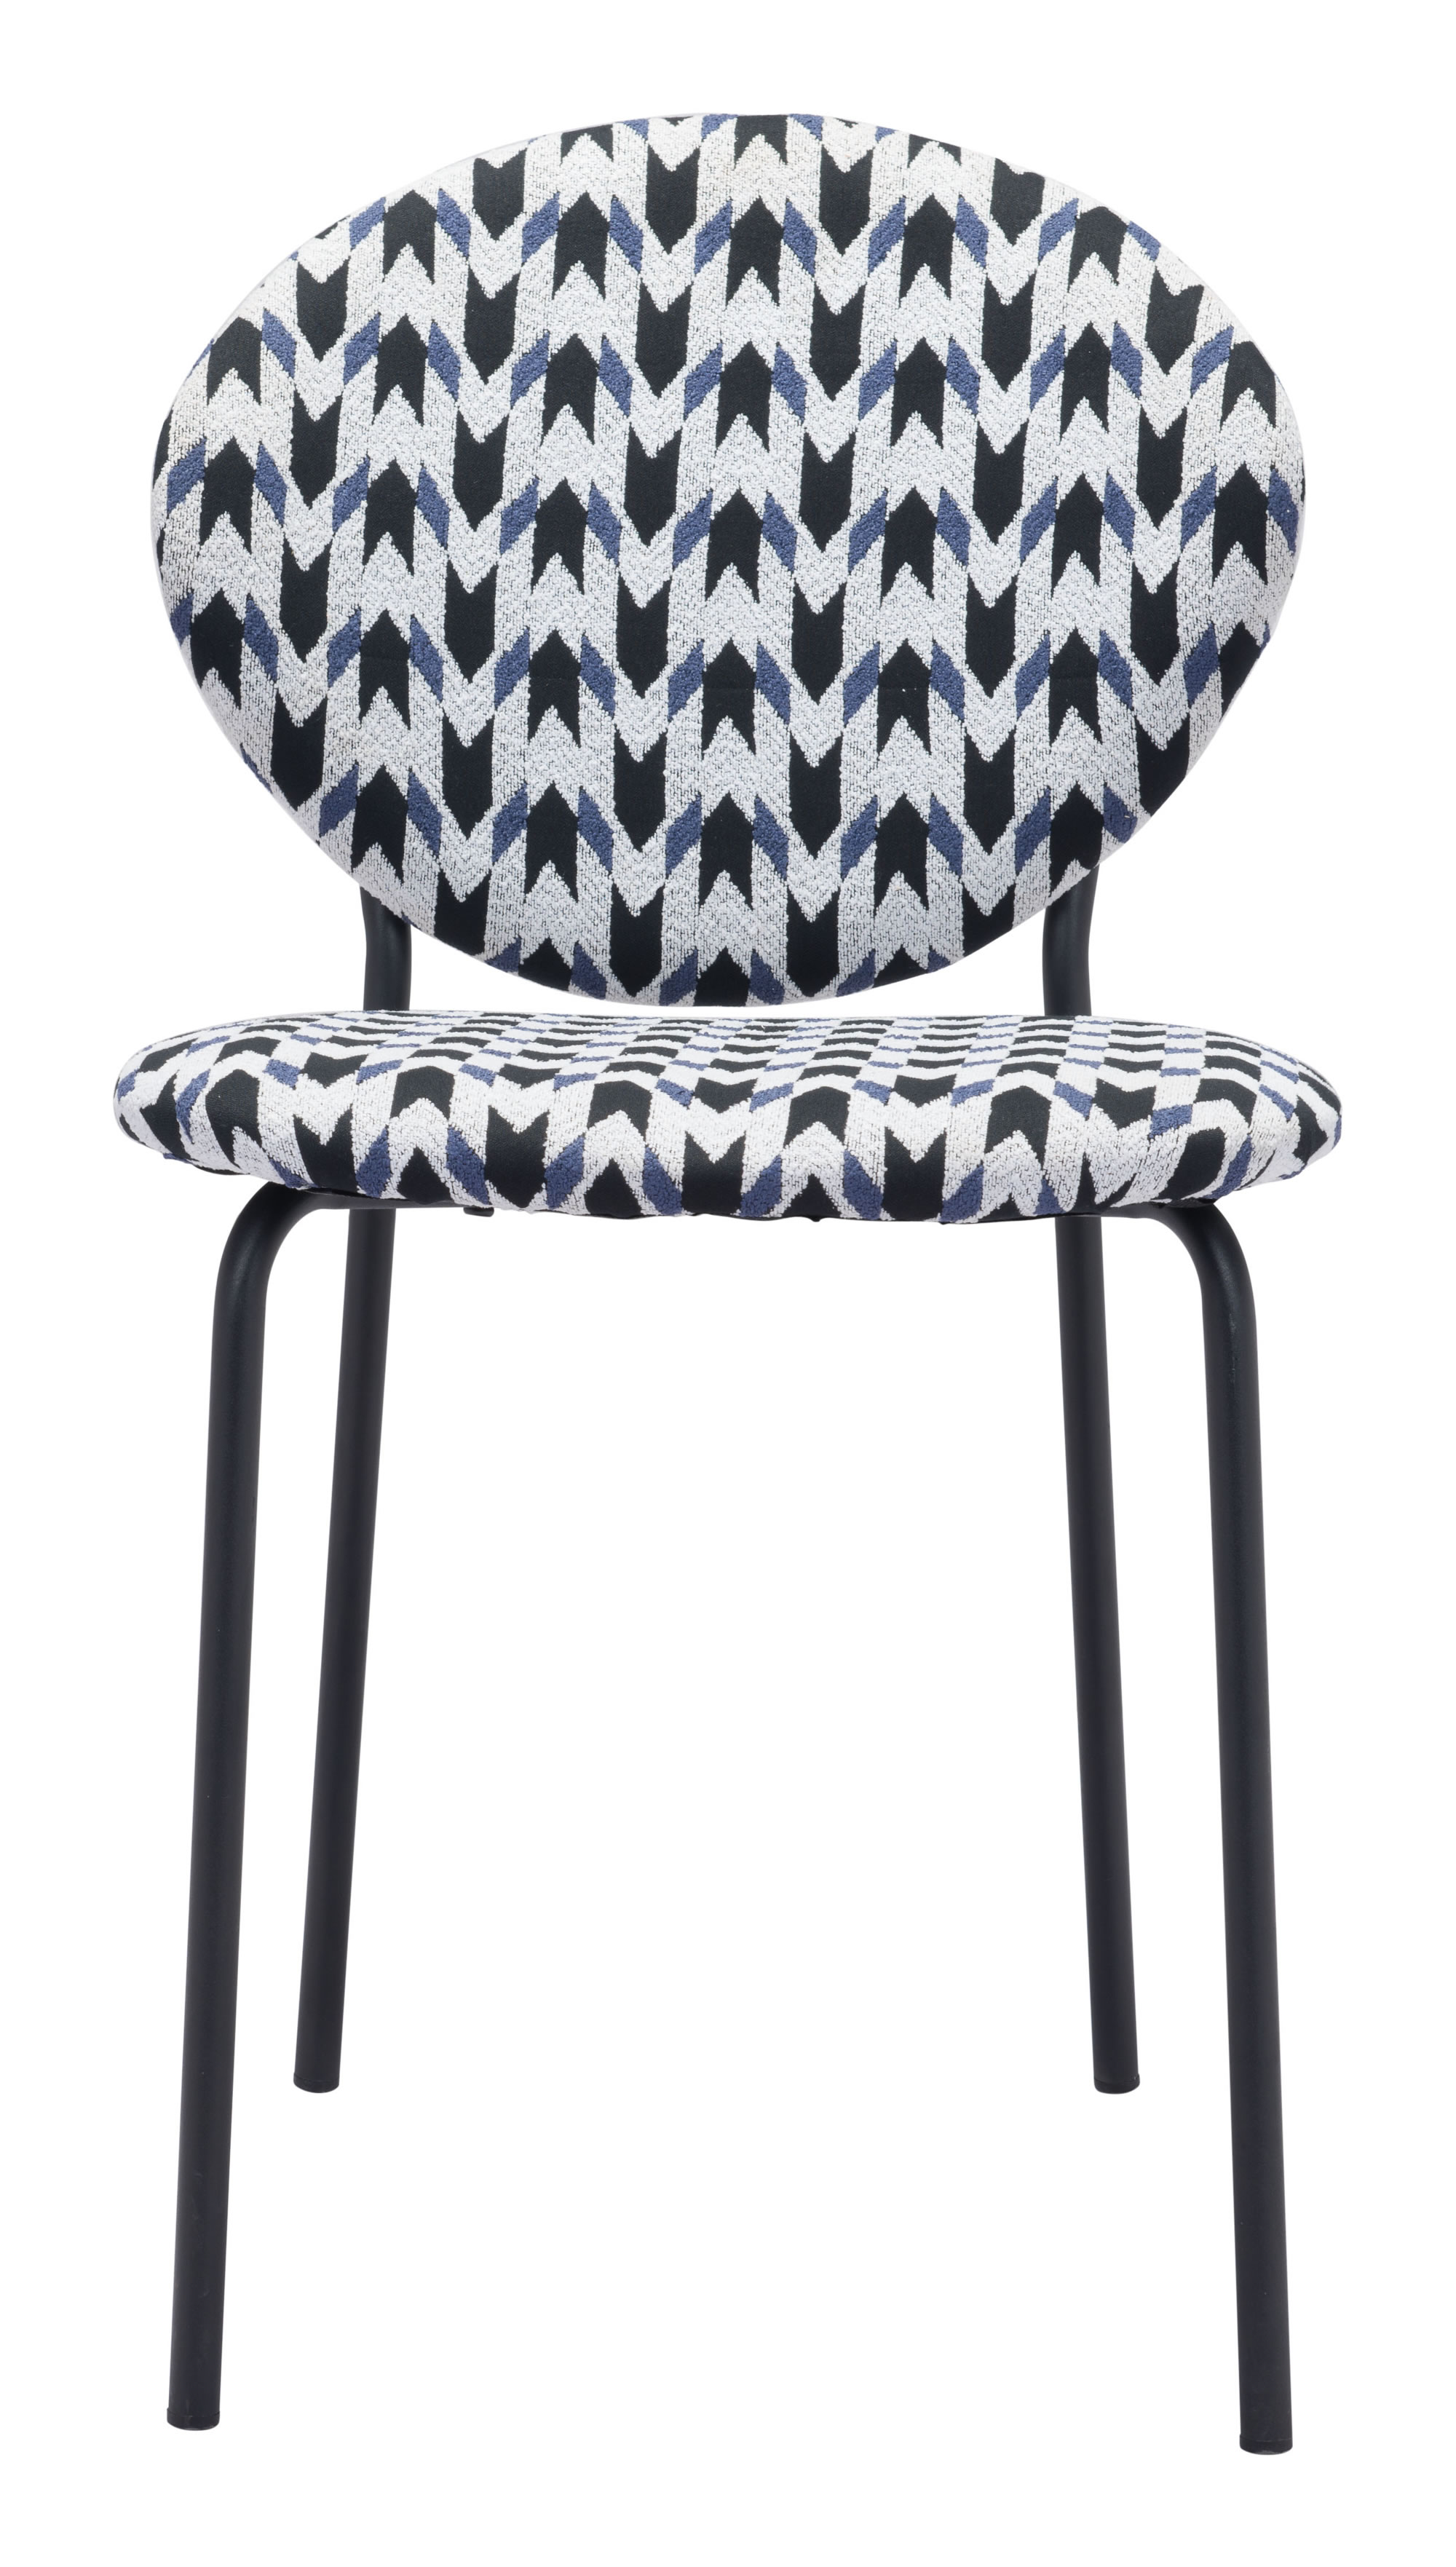 18.1" x 23.6" x 32.3" Multicolor, Black, Steel & Plywood, Chair - Set of 2